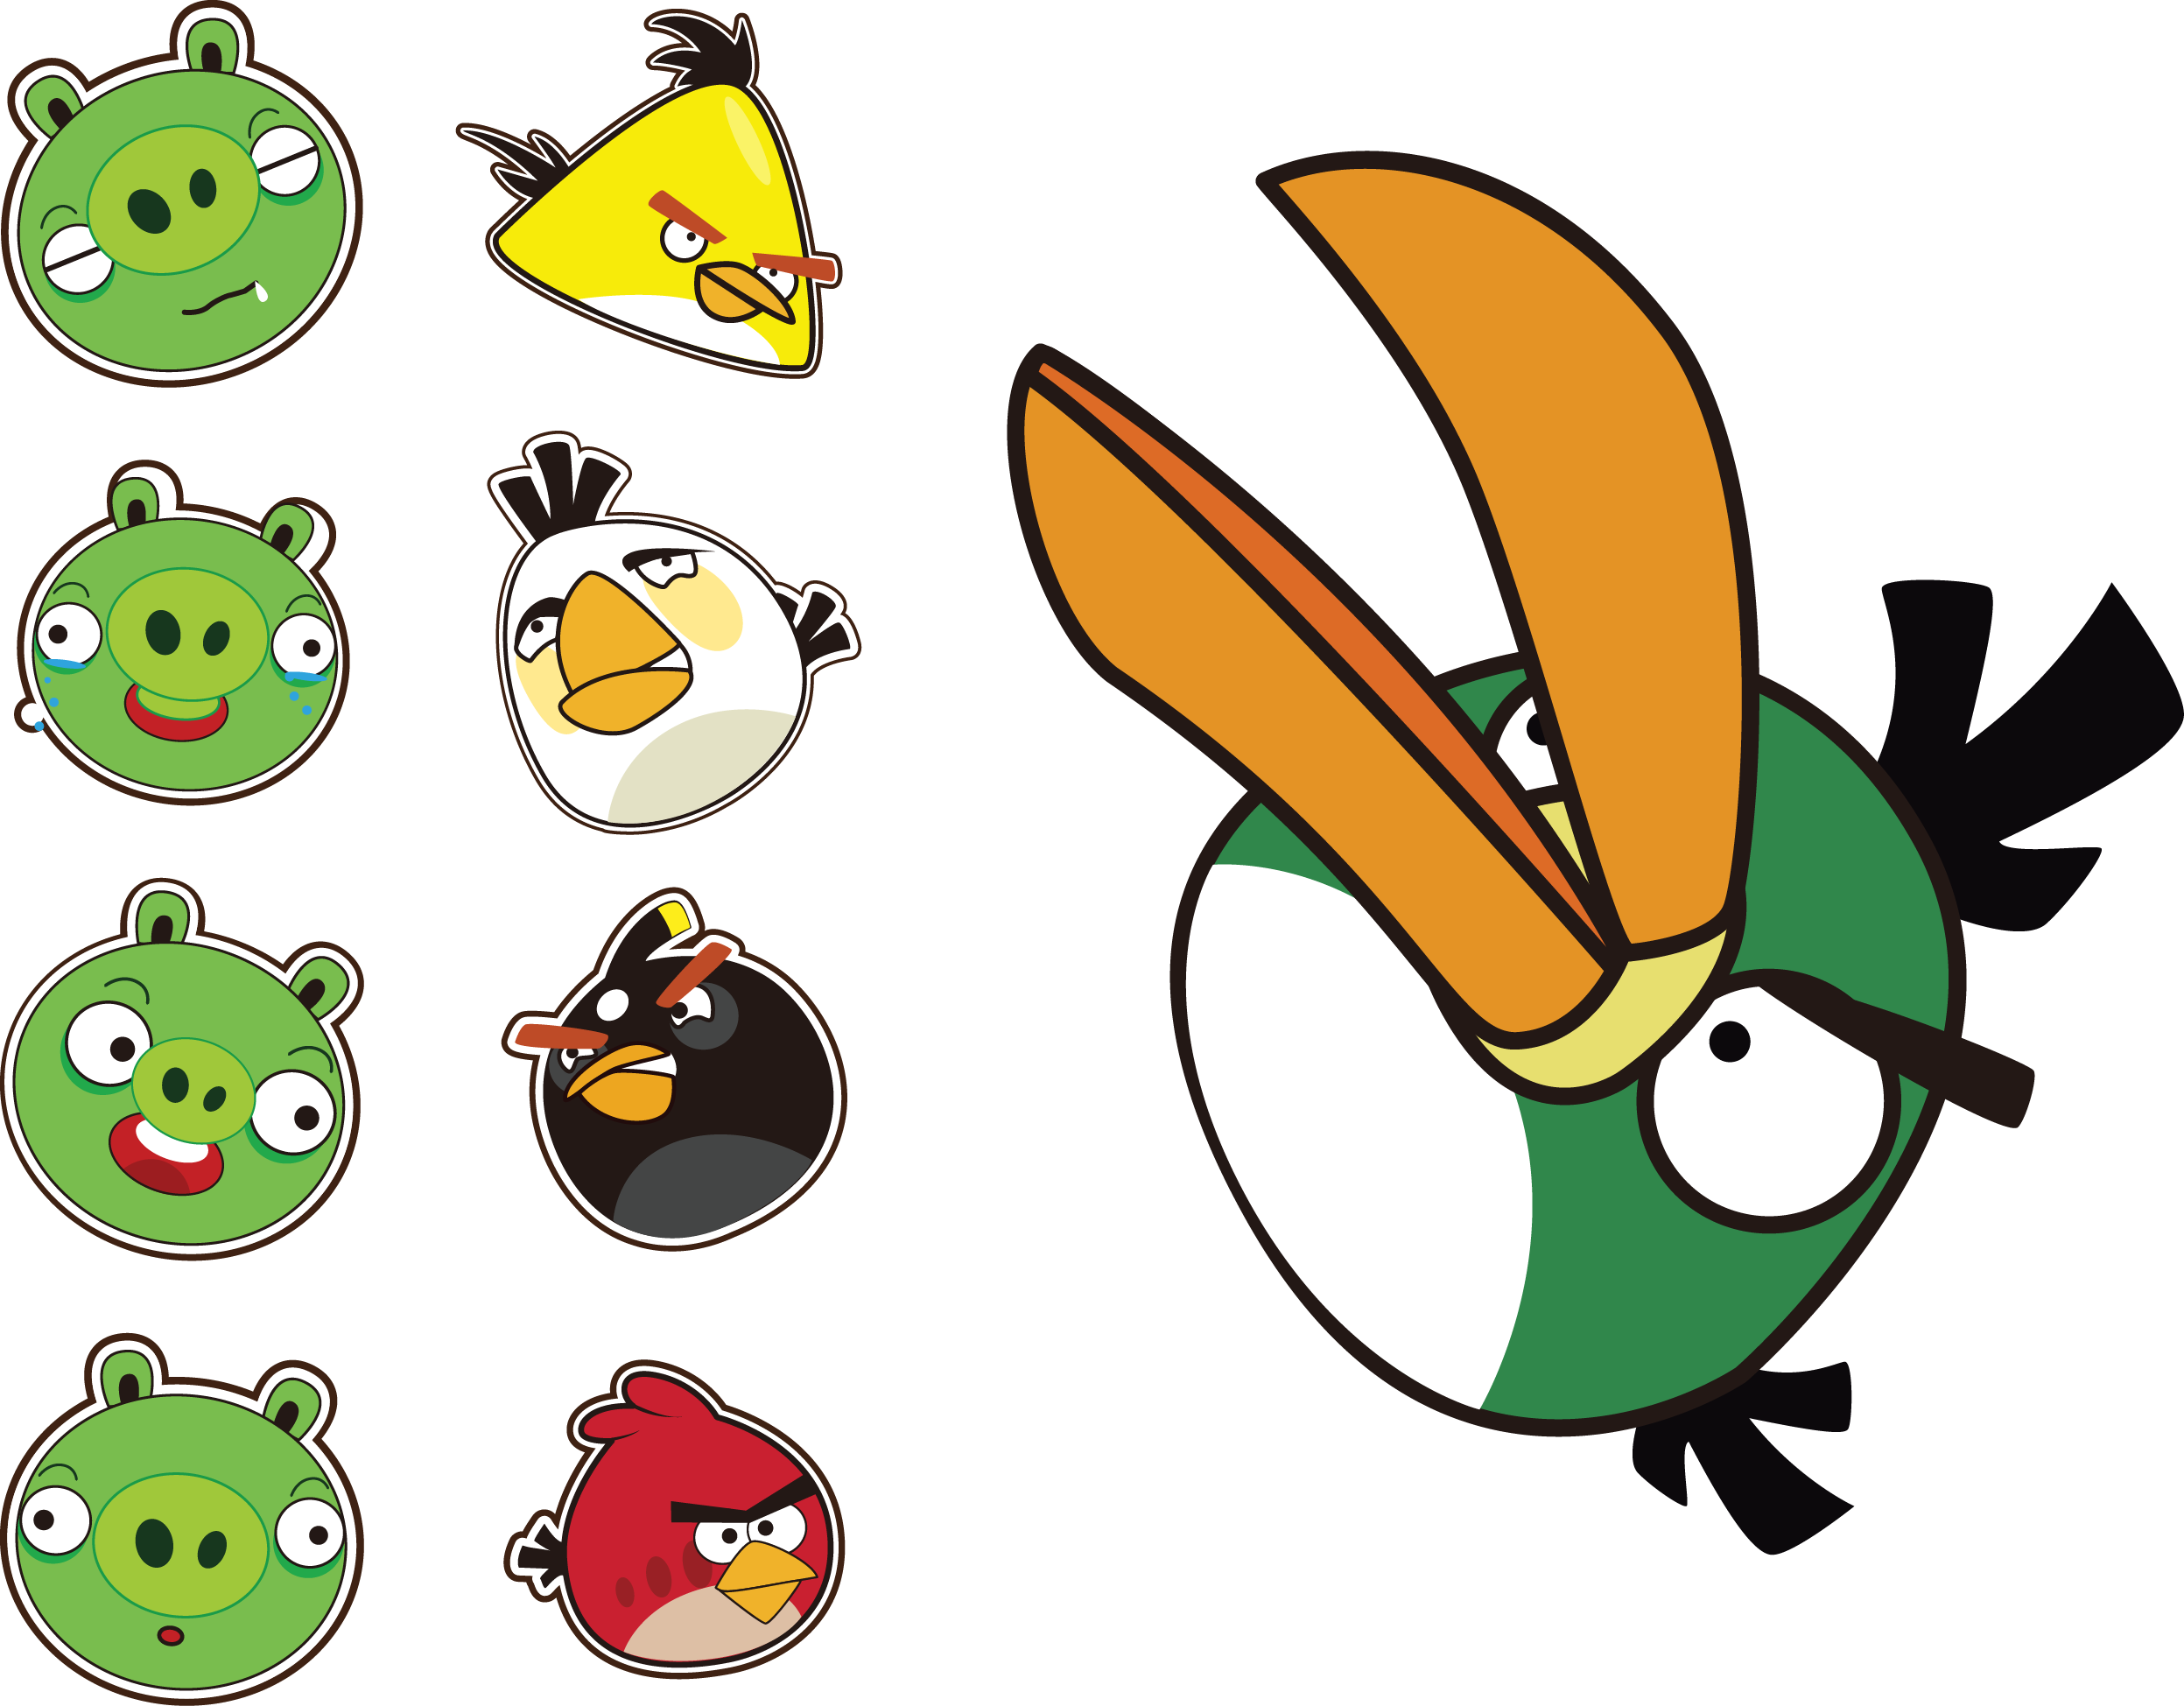 Angry Birds Star Wars Angry Birds Rio Angry Birds Friends - Angry Birds Clip Art (2495x1949)